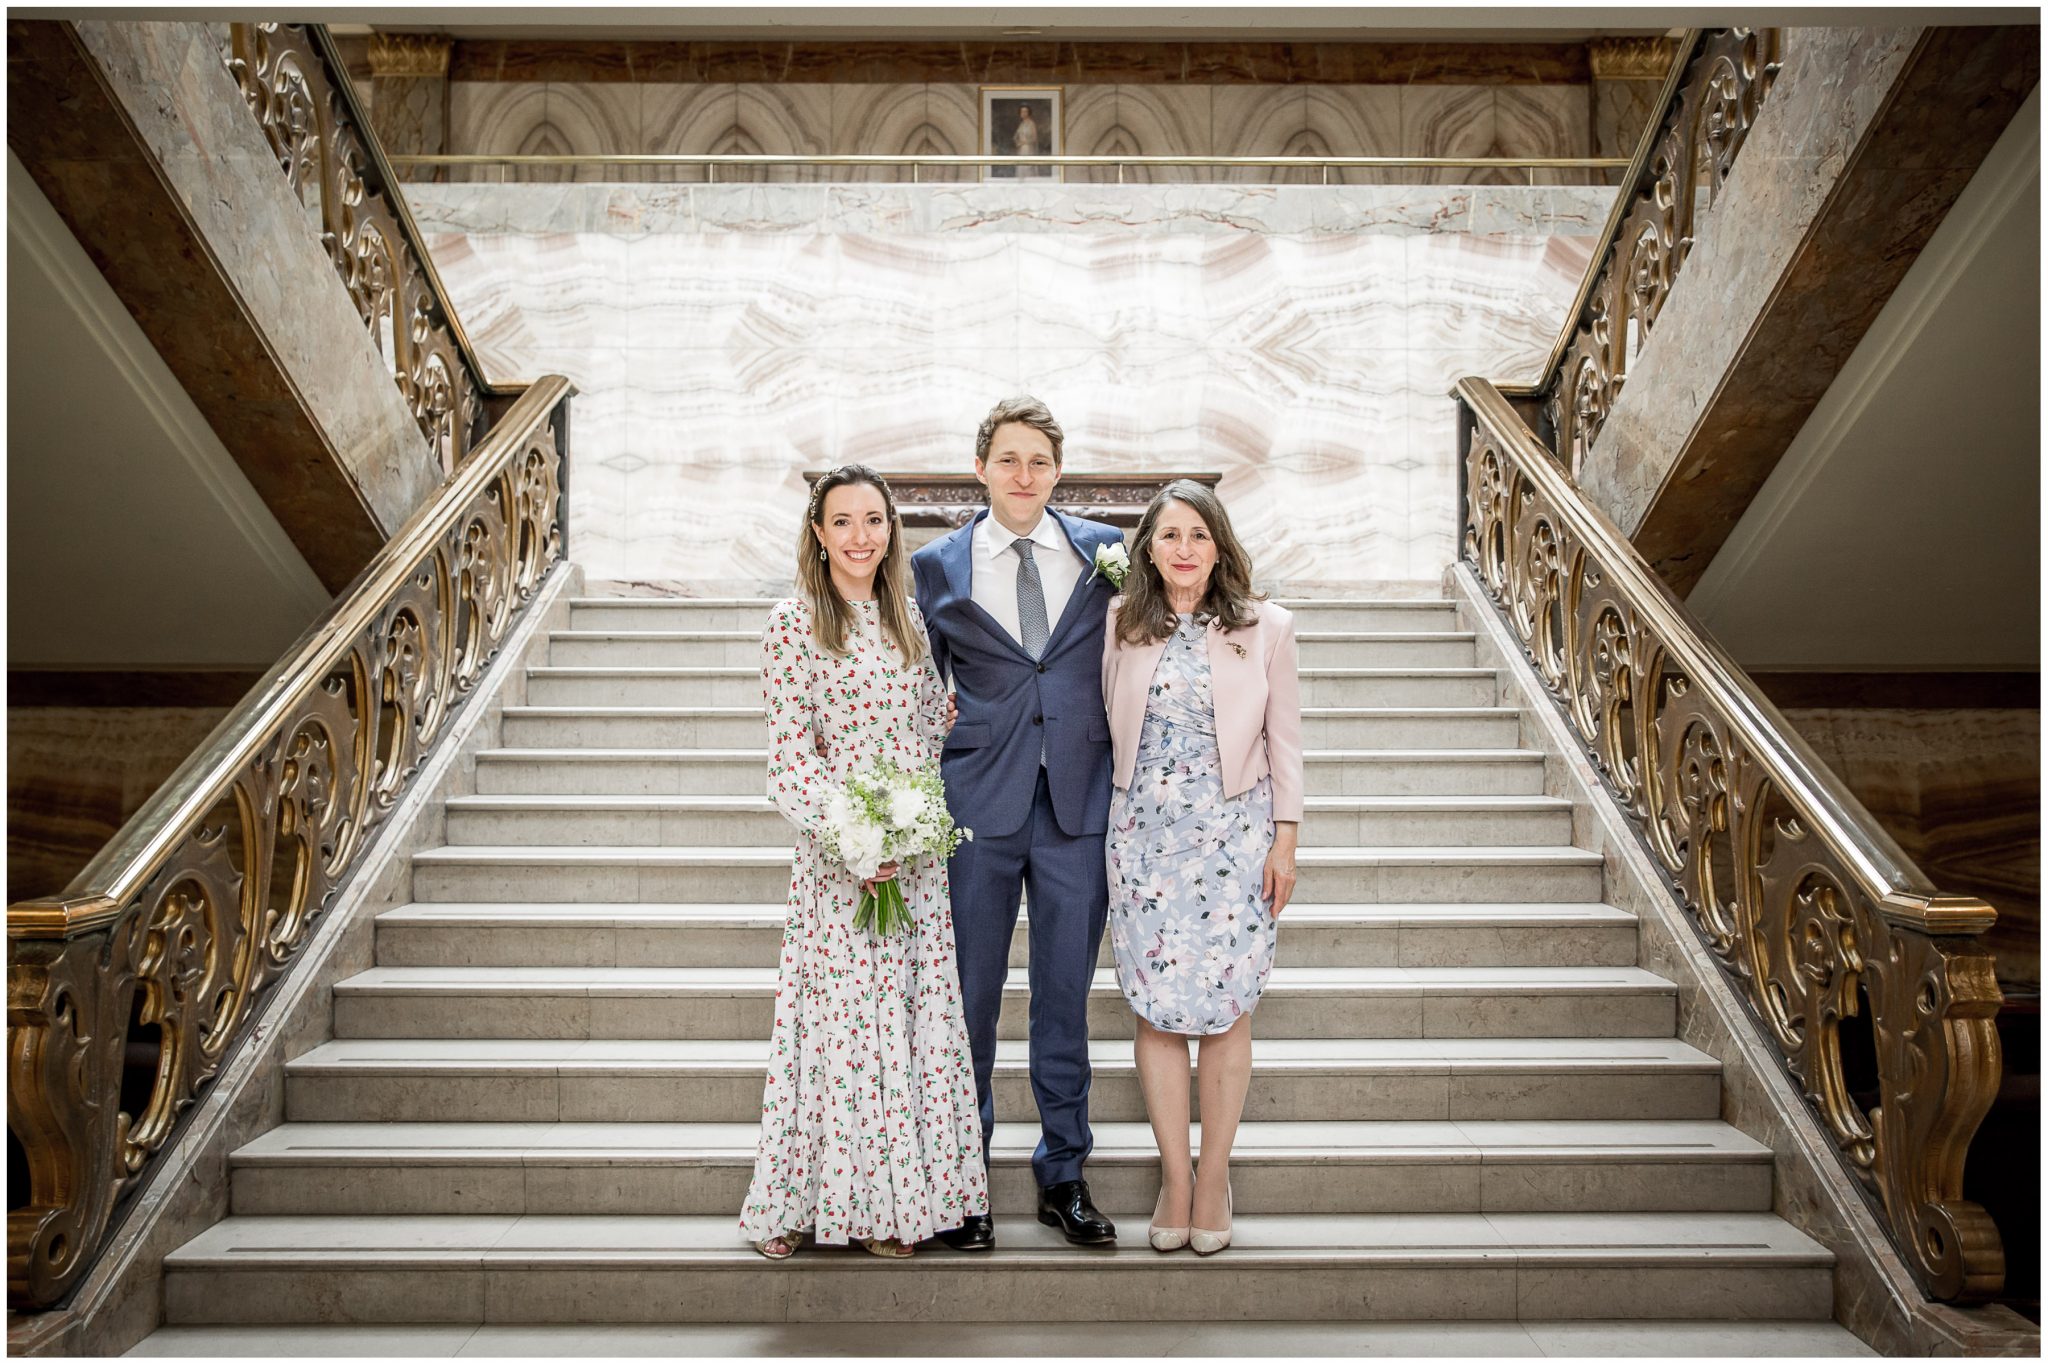 Formal photos on the staircase of the town hall in London